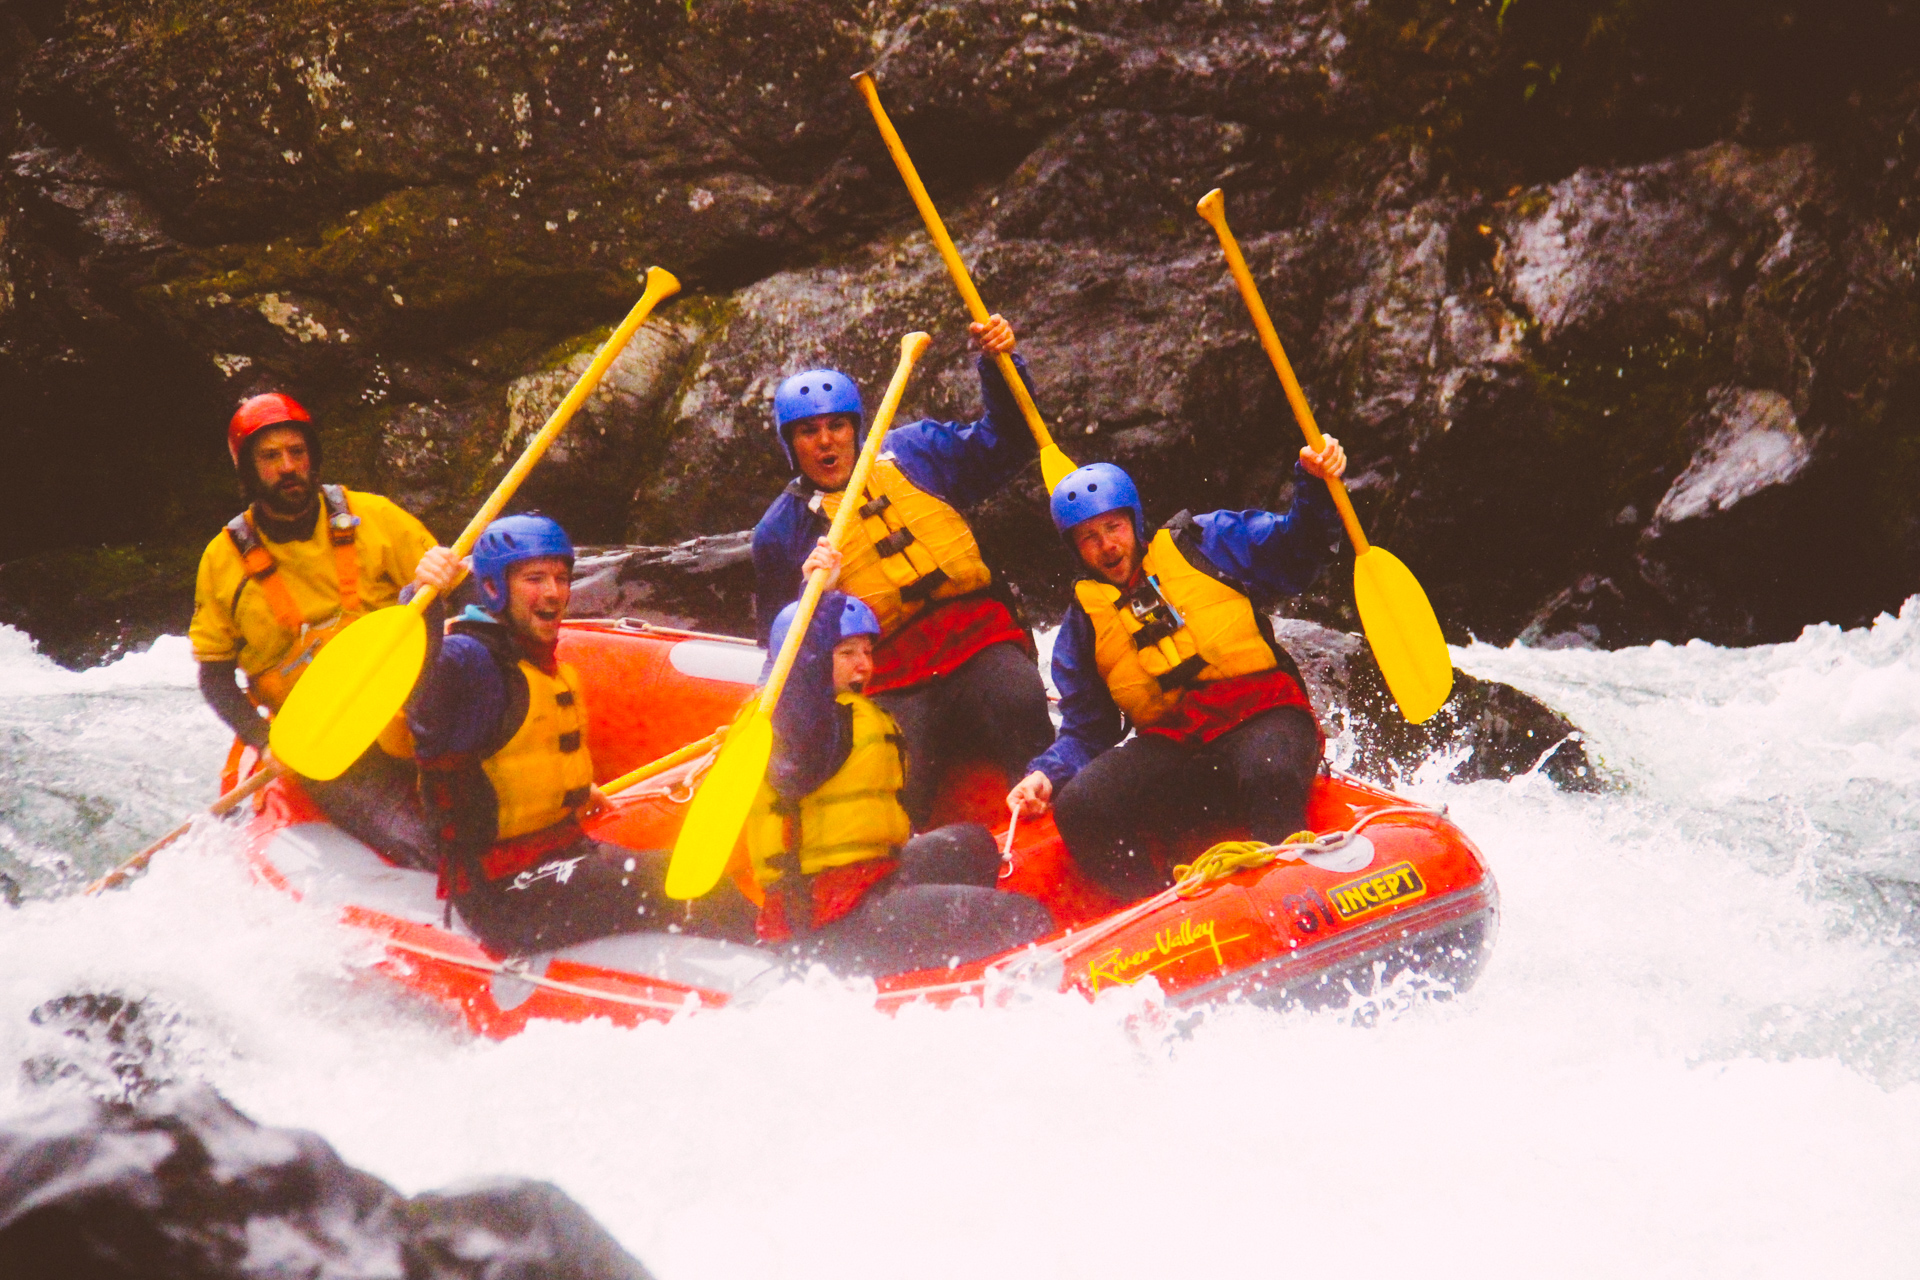 River Valley rafting in New Zealand on the Kiwi Experience Bus